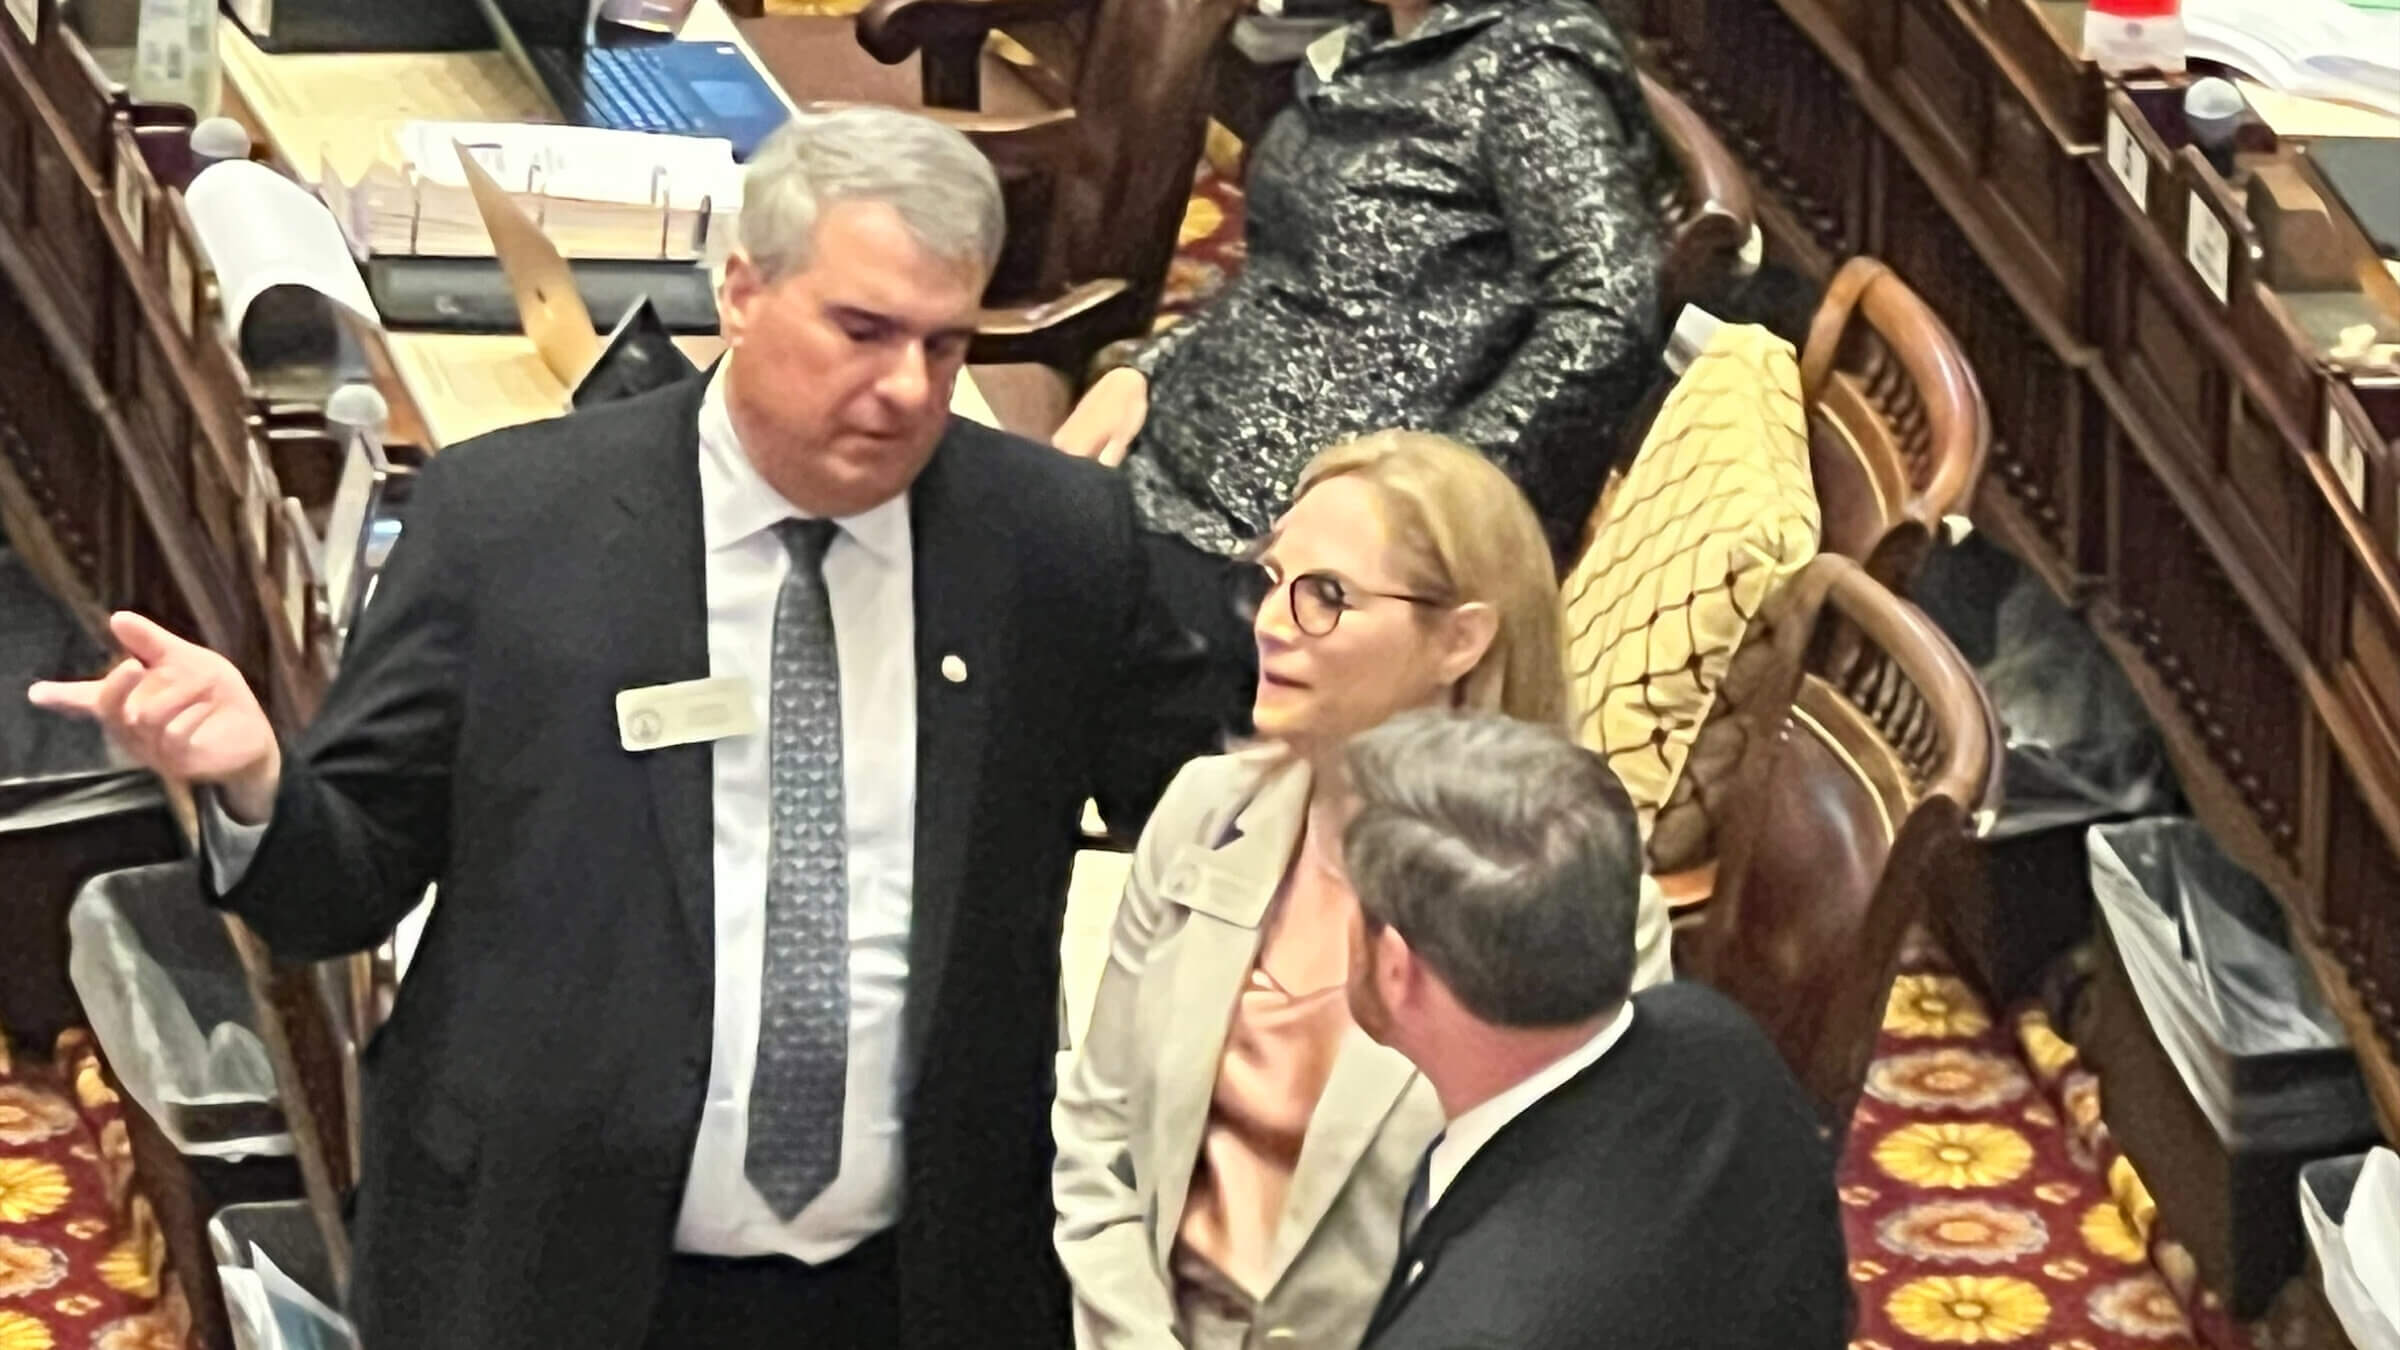 Democrat Esther Panitch (<i>center</i>), Georgia's only Jewish legislator, stands with Republican John Carson (<i>left</i>). The two co-sponsored a bill defining antisemitism that recently was approved by the state House of Representatives.